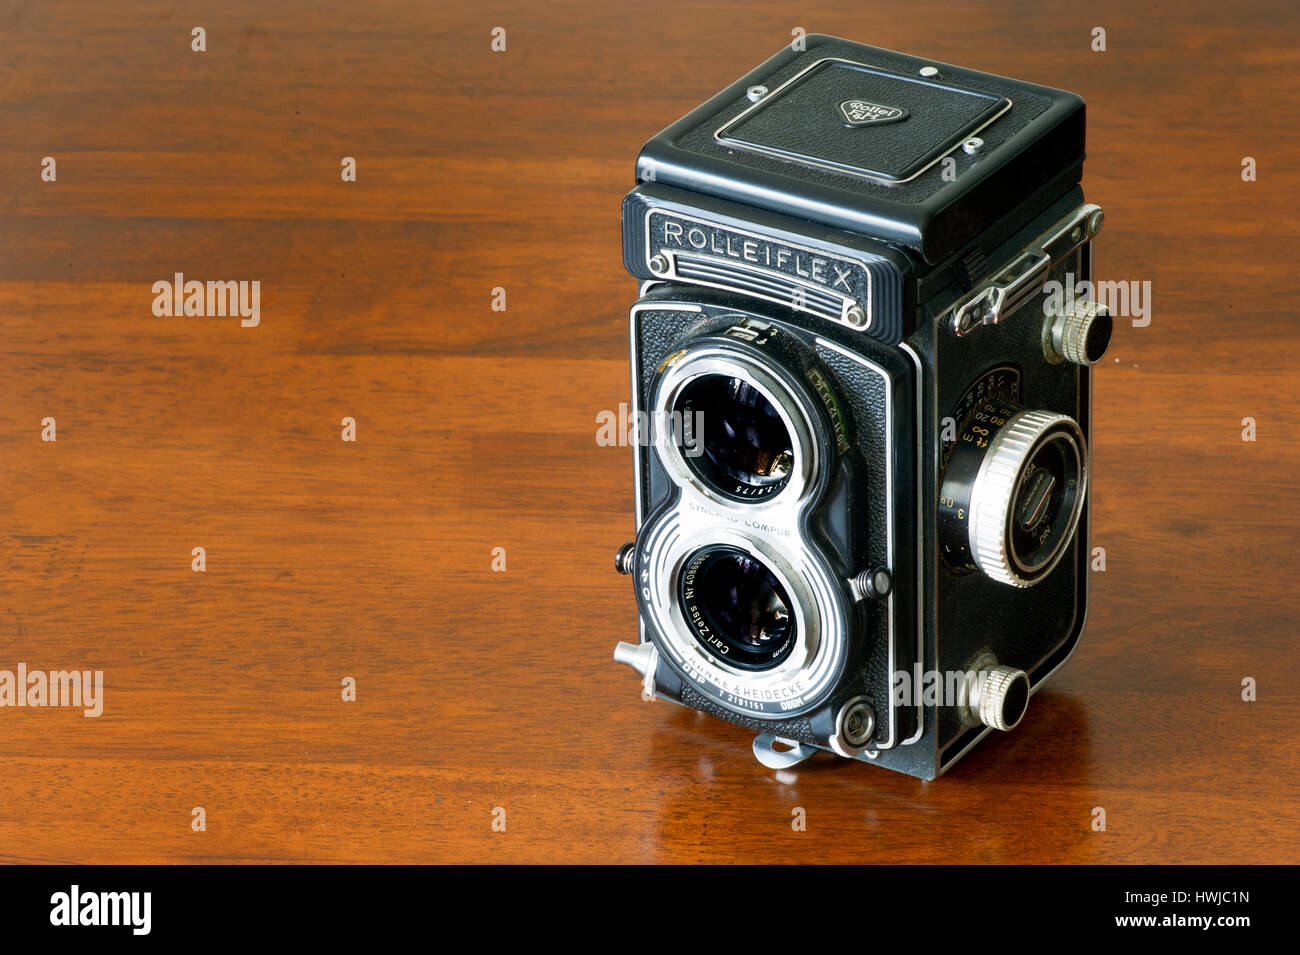 Vintage collectible bioptical Rolleiflex camera still life on wooden table Stock Photo